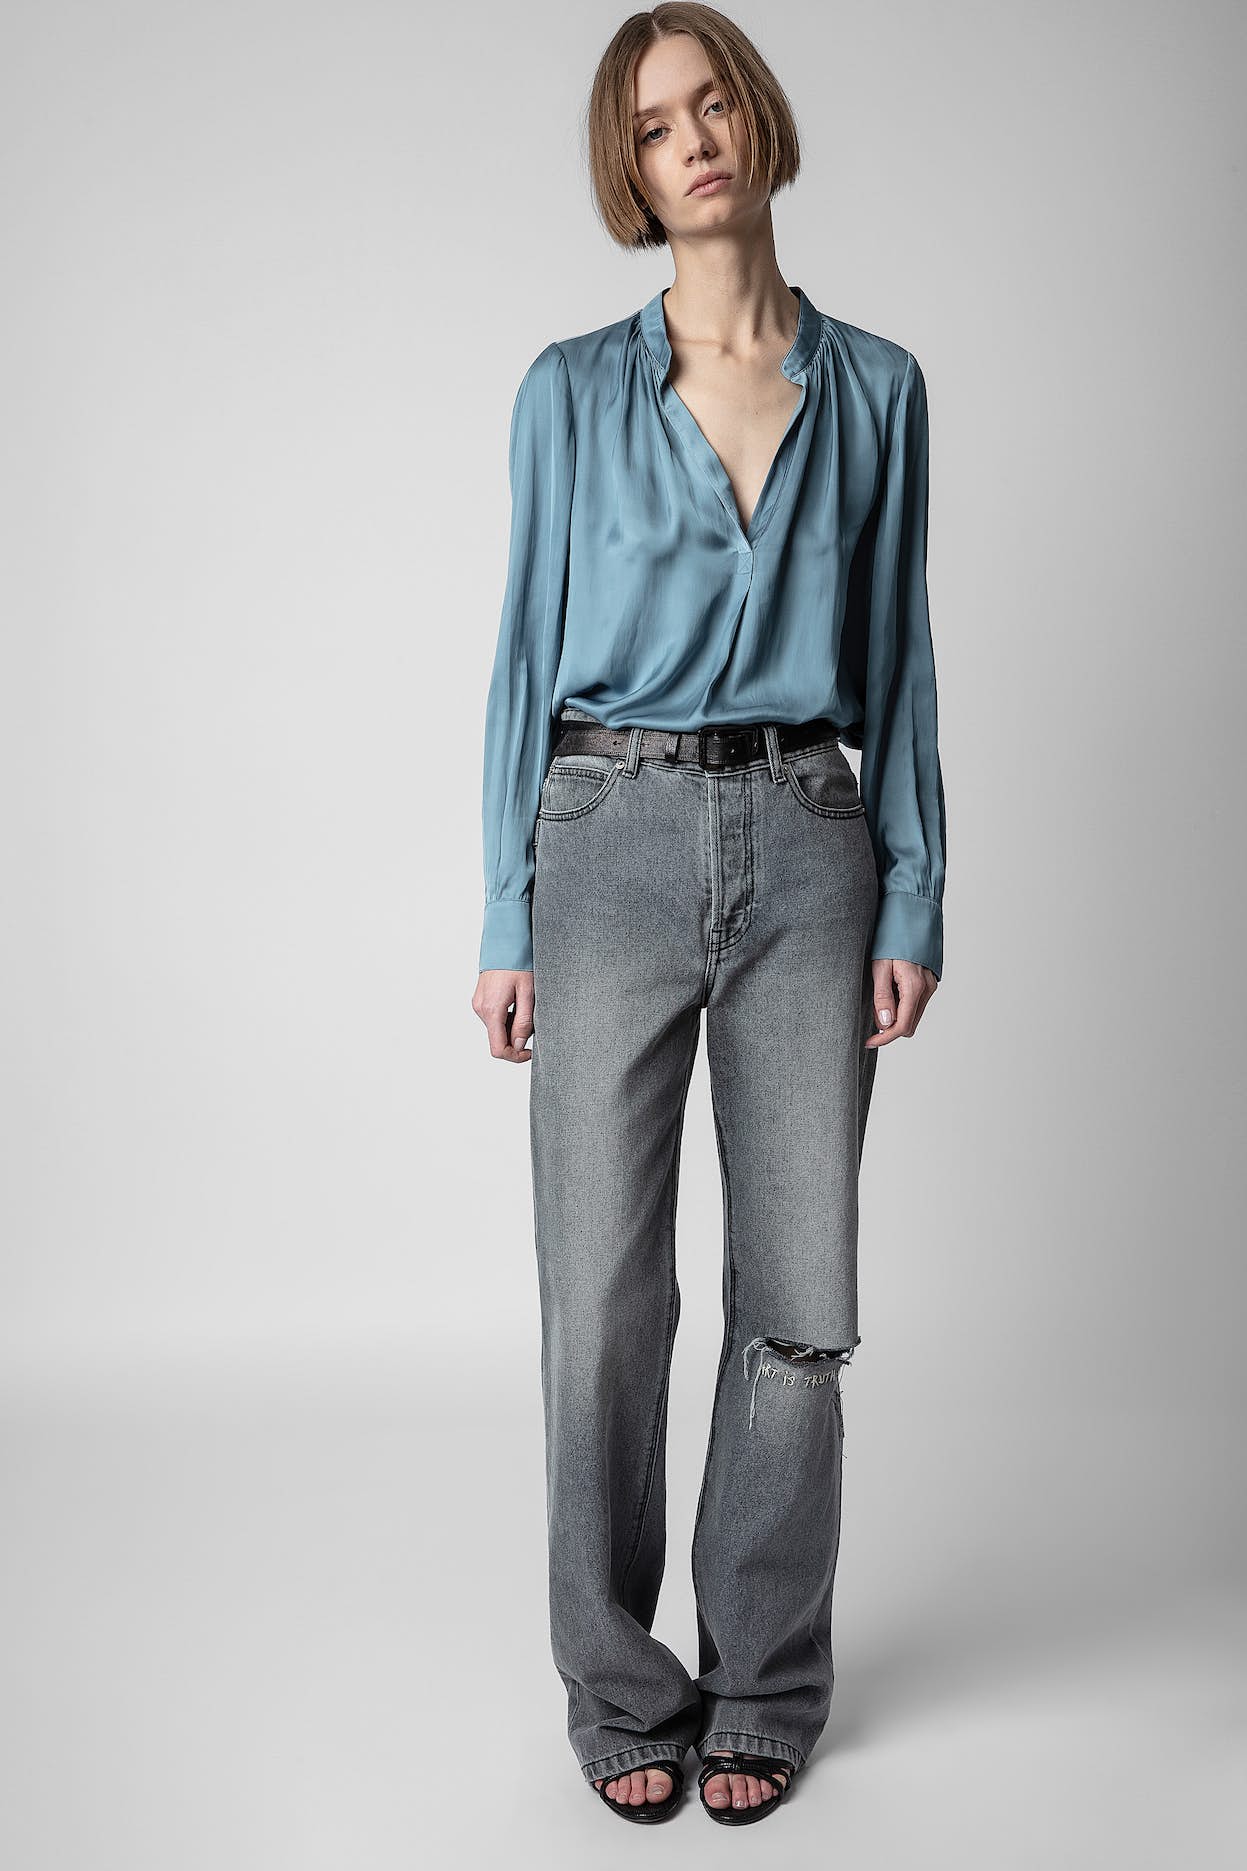 Zadig & Voltaire | Tink Relaxed Fit Satin Tee